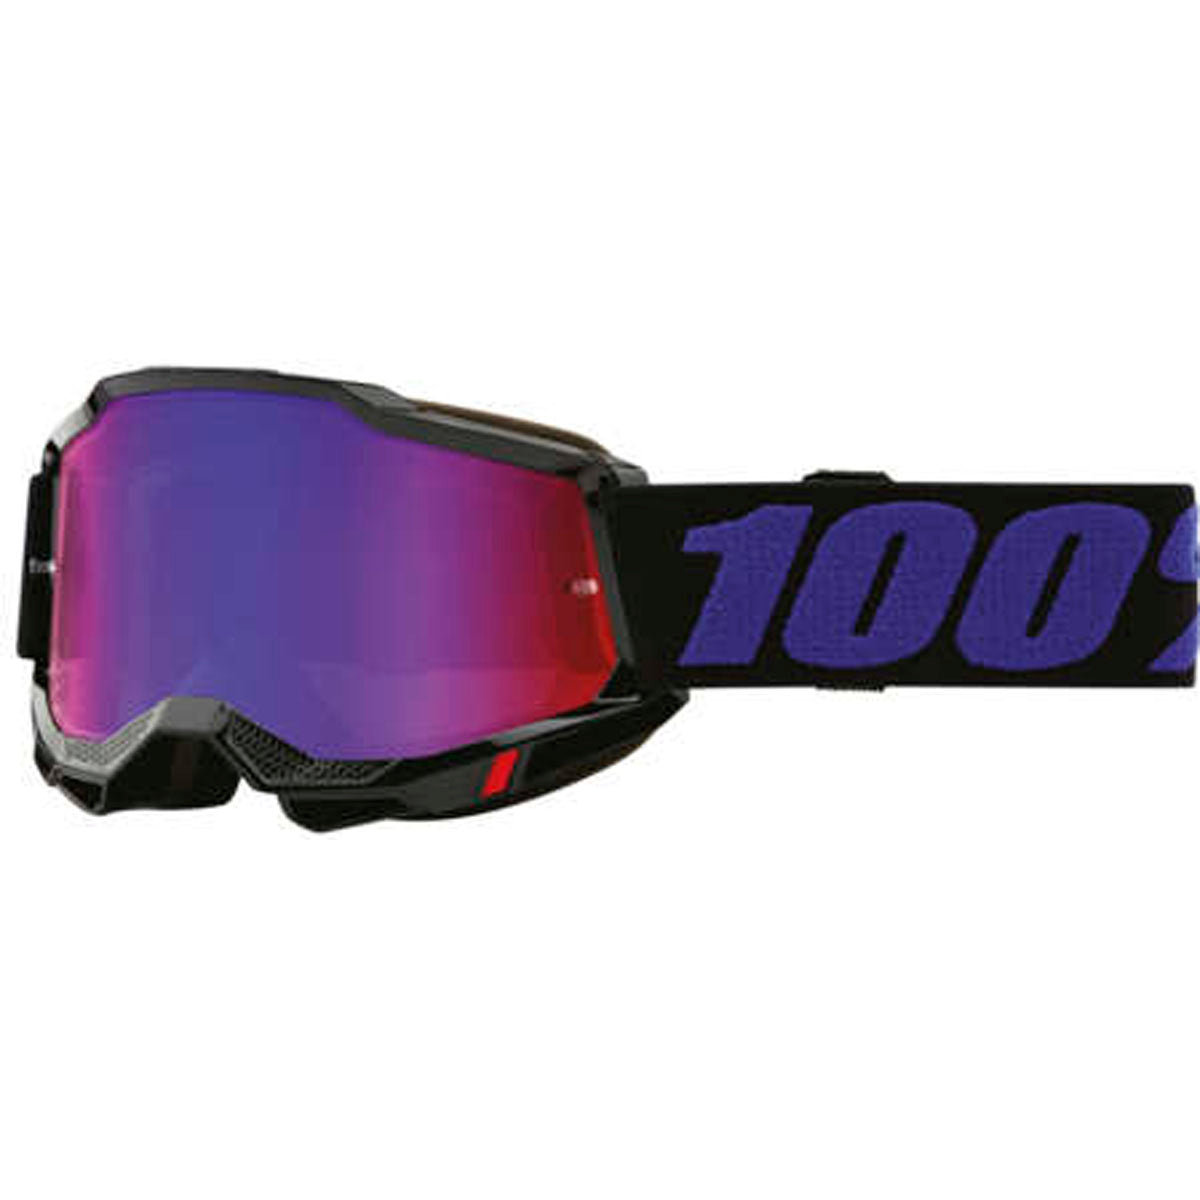 100% Accuri 2 Goggles Moore / Red/Blue Mirrored Lens